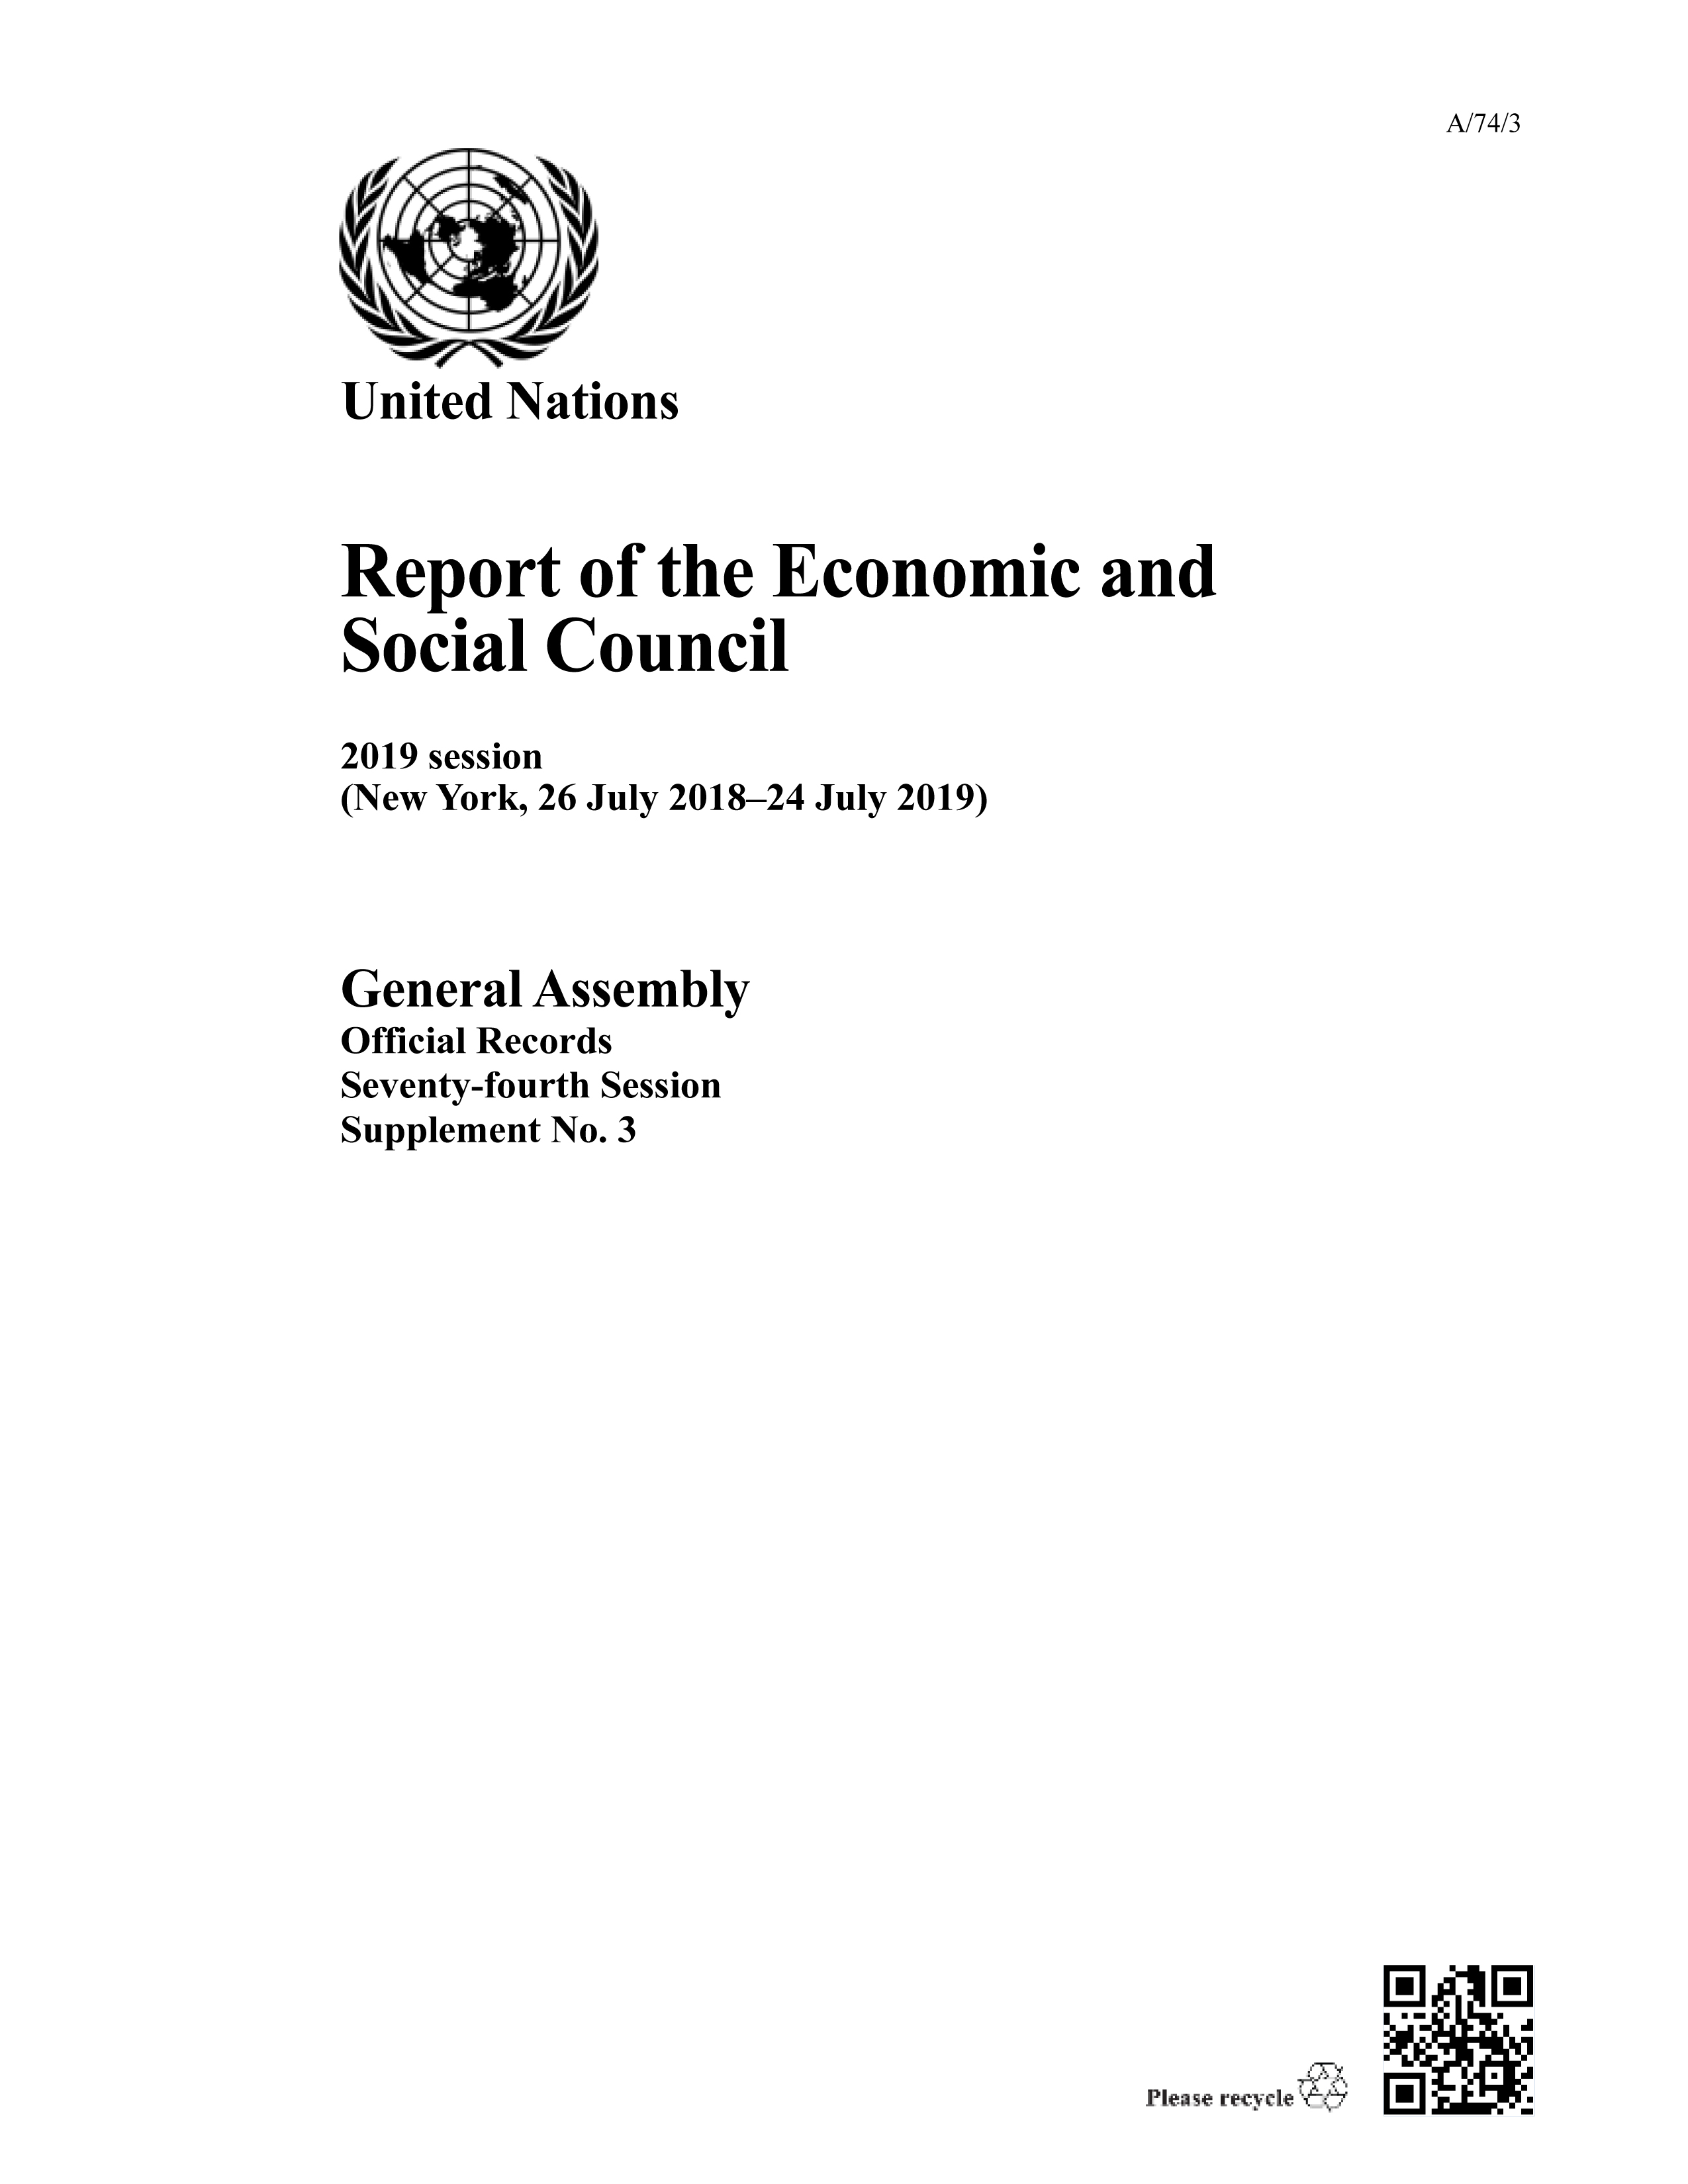 image of Report of the Economic and Social Council on its 2019 Session